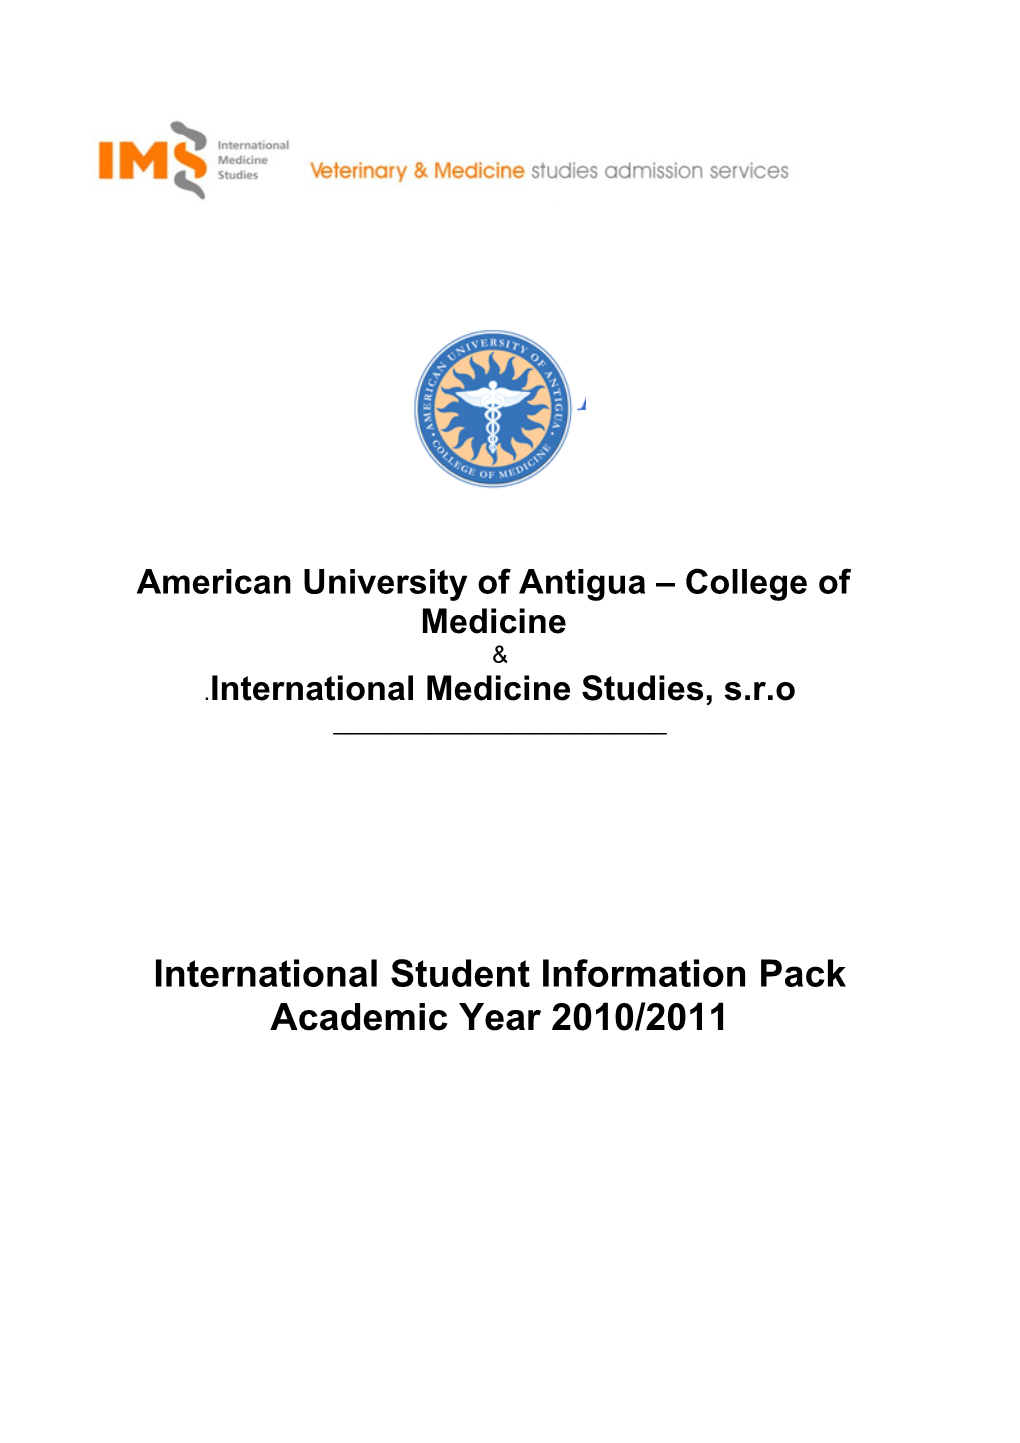 American University of Antigua College of Medicine Provides a Medical Education Equal To